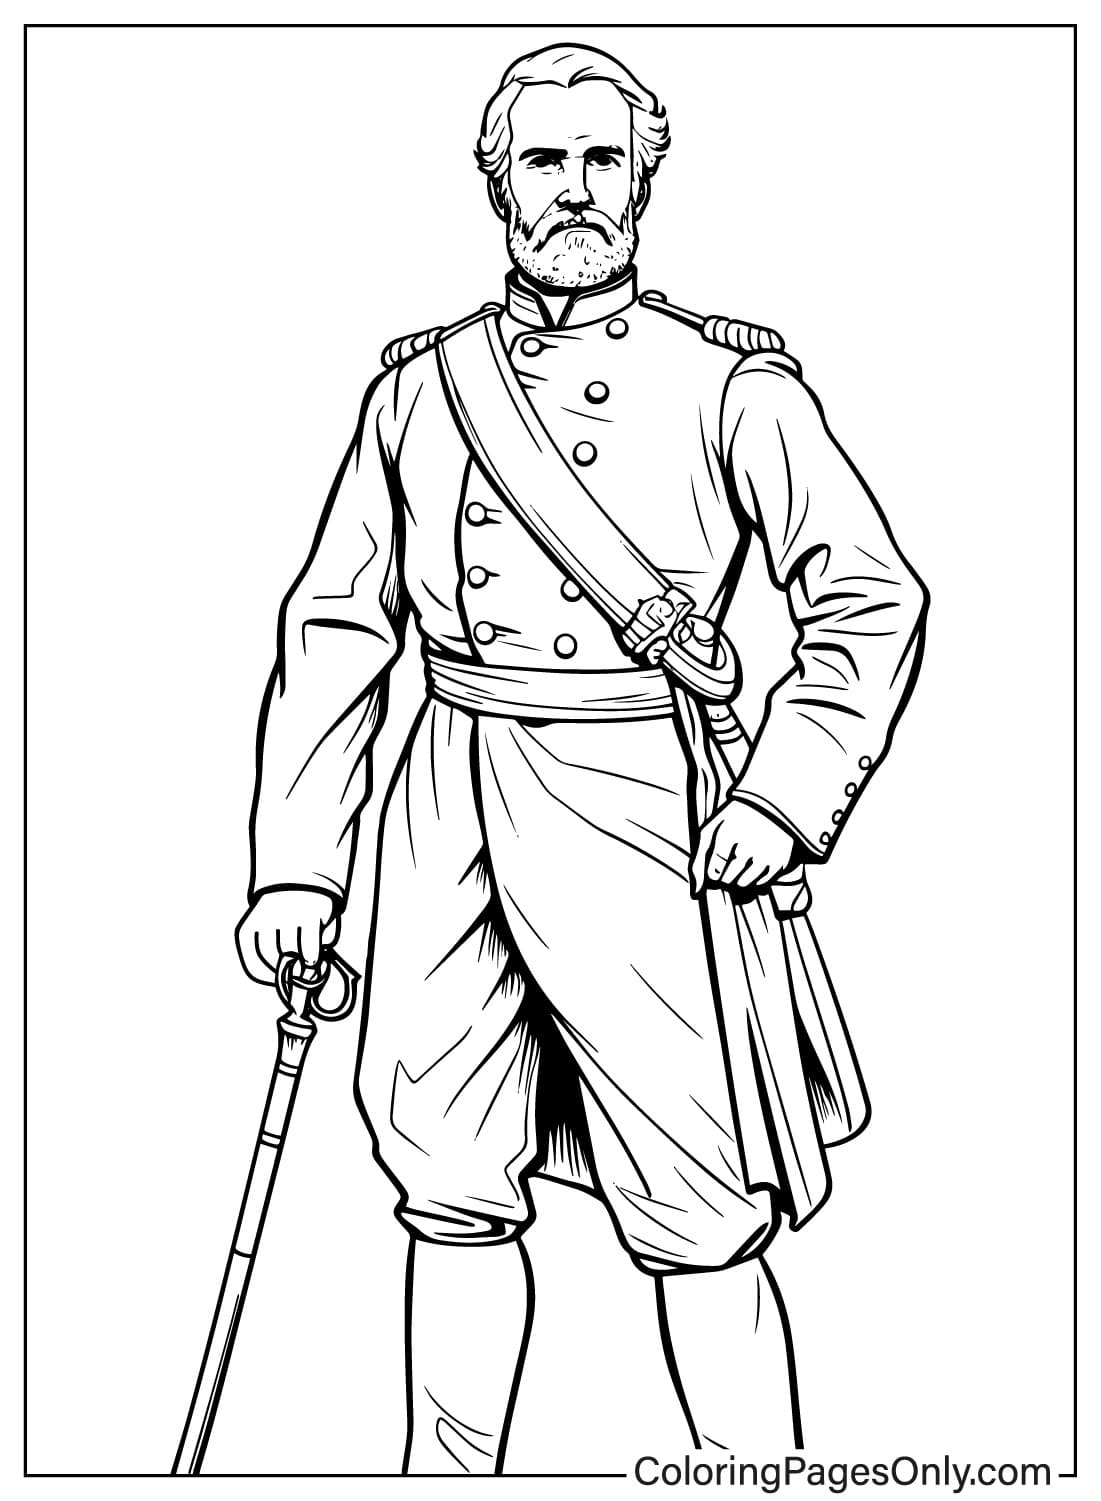 Robert E. Lee Coloring Page Free Printable from Robert E. Lee